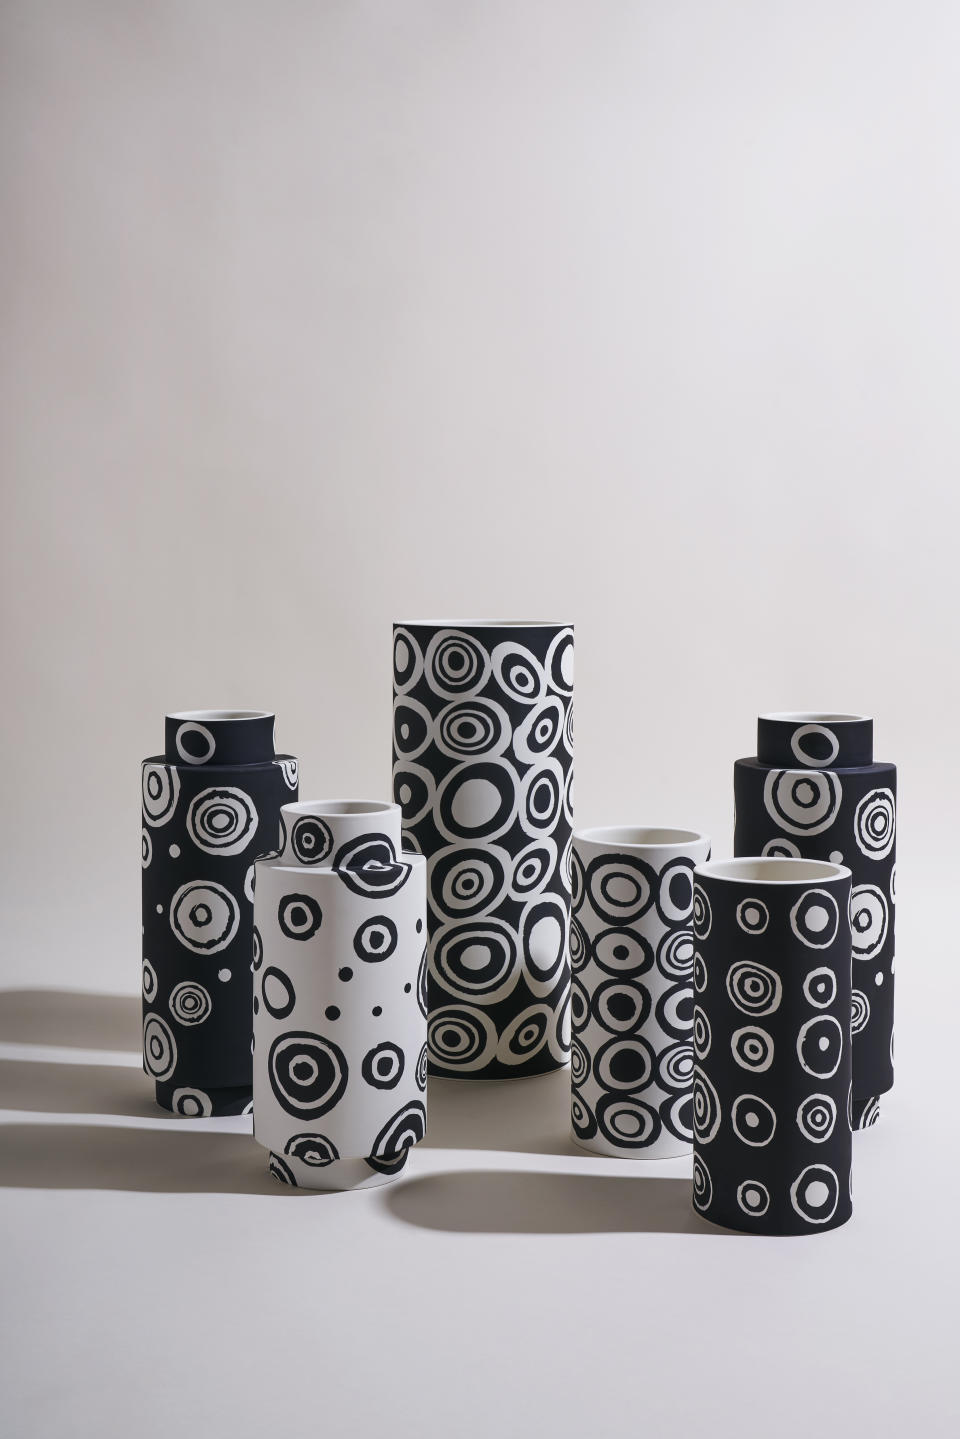 A selection of the new 10 Corso Como vases. - Credit: courtesy image